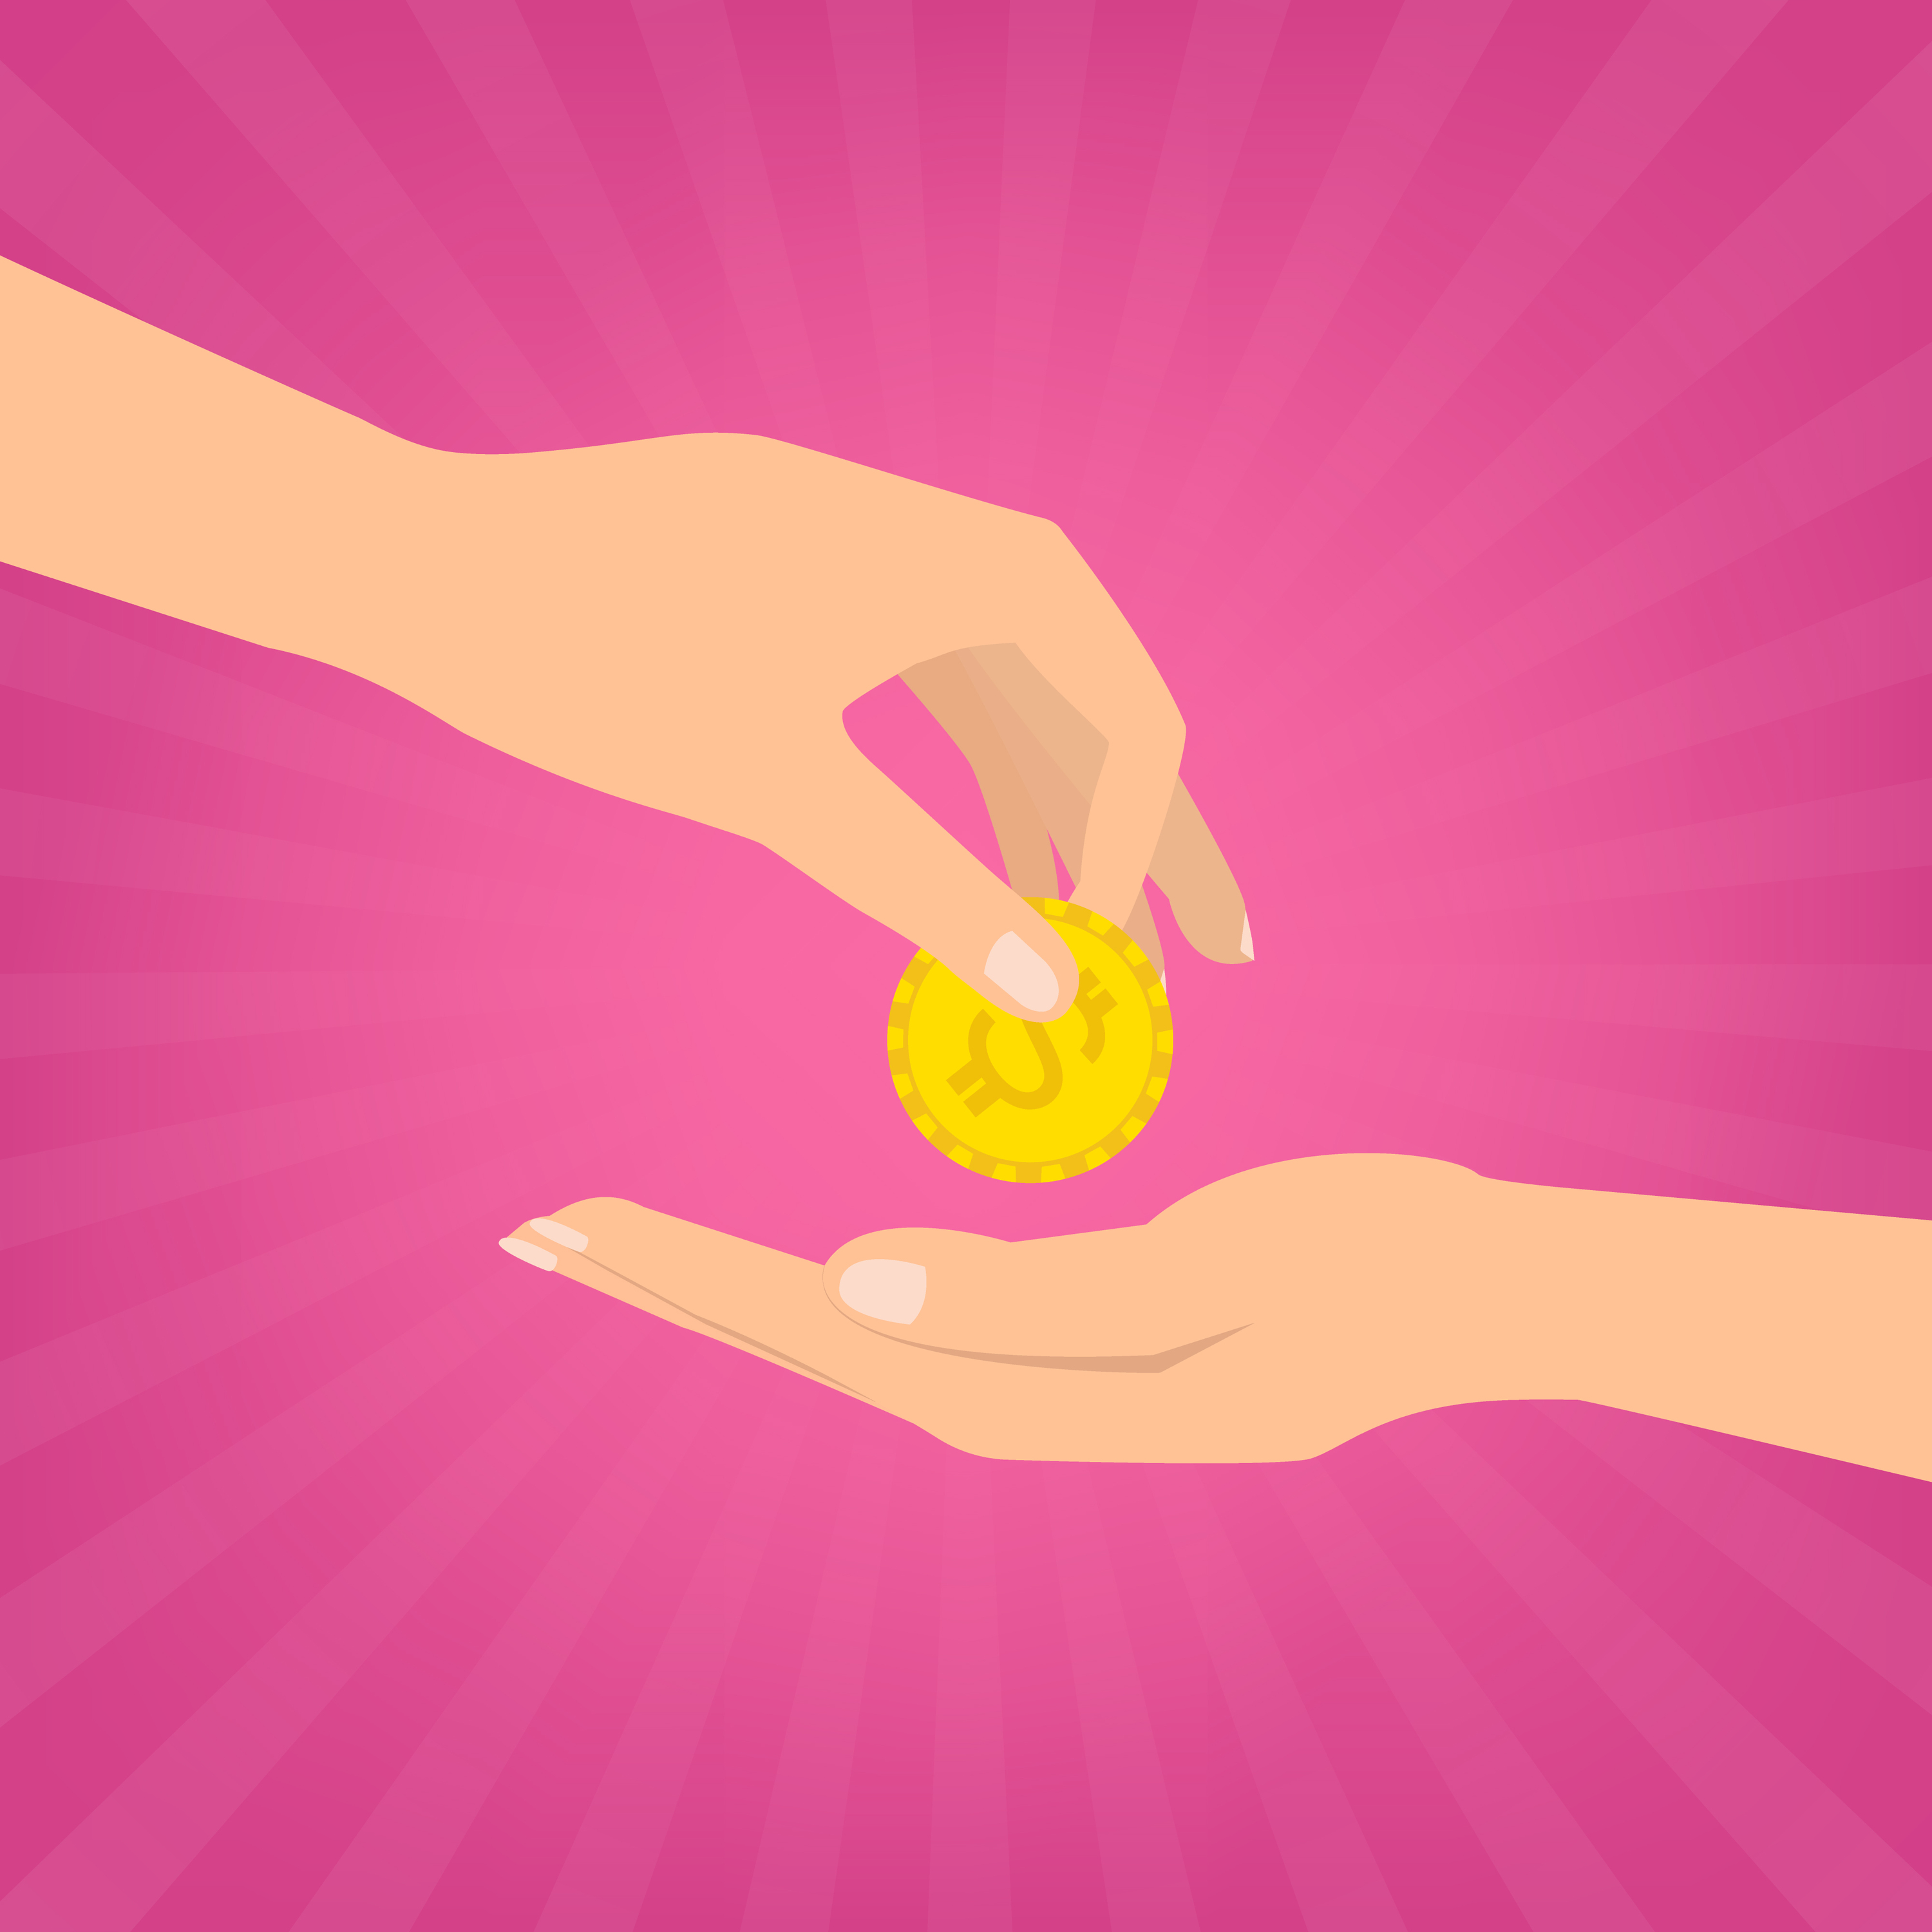 Human hand putting money coins to hand for donate on pink sunray background. Flat design vector illustration donate money concept.